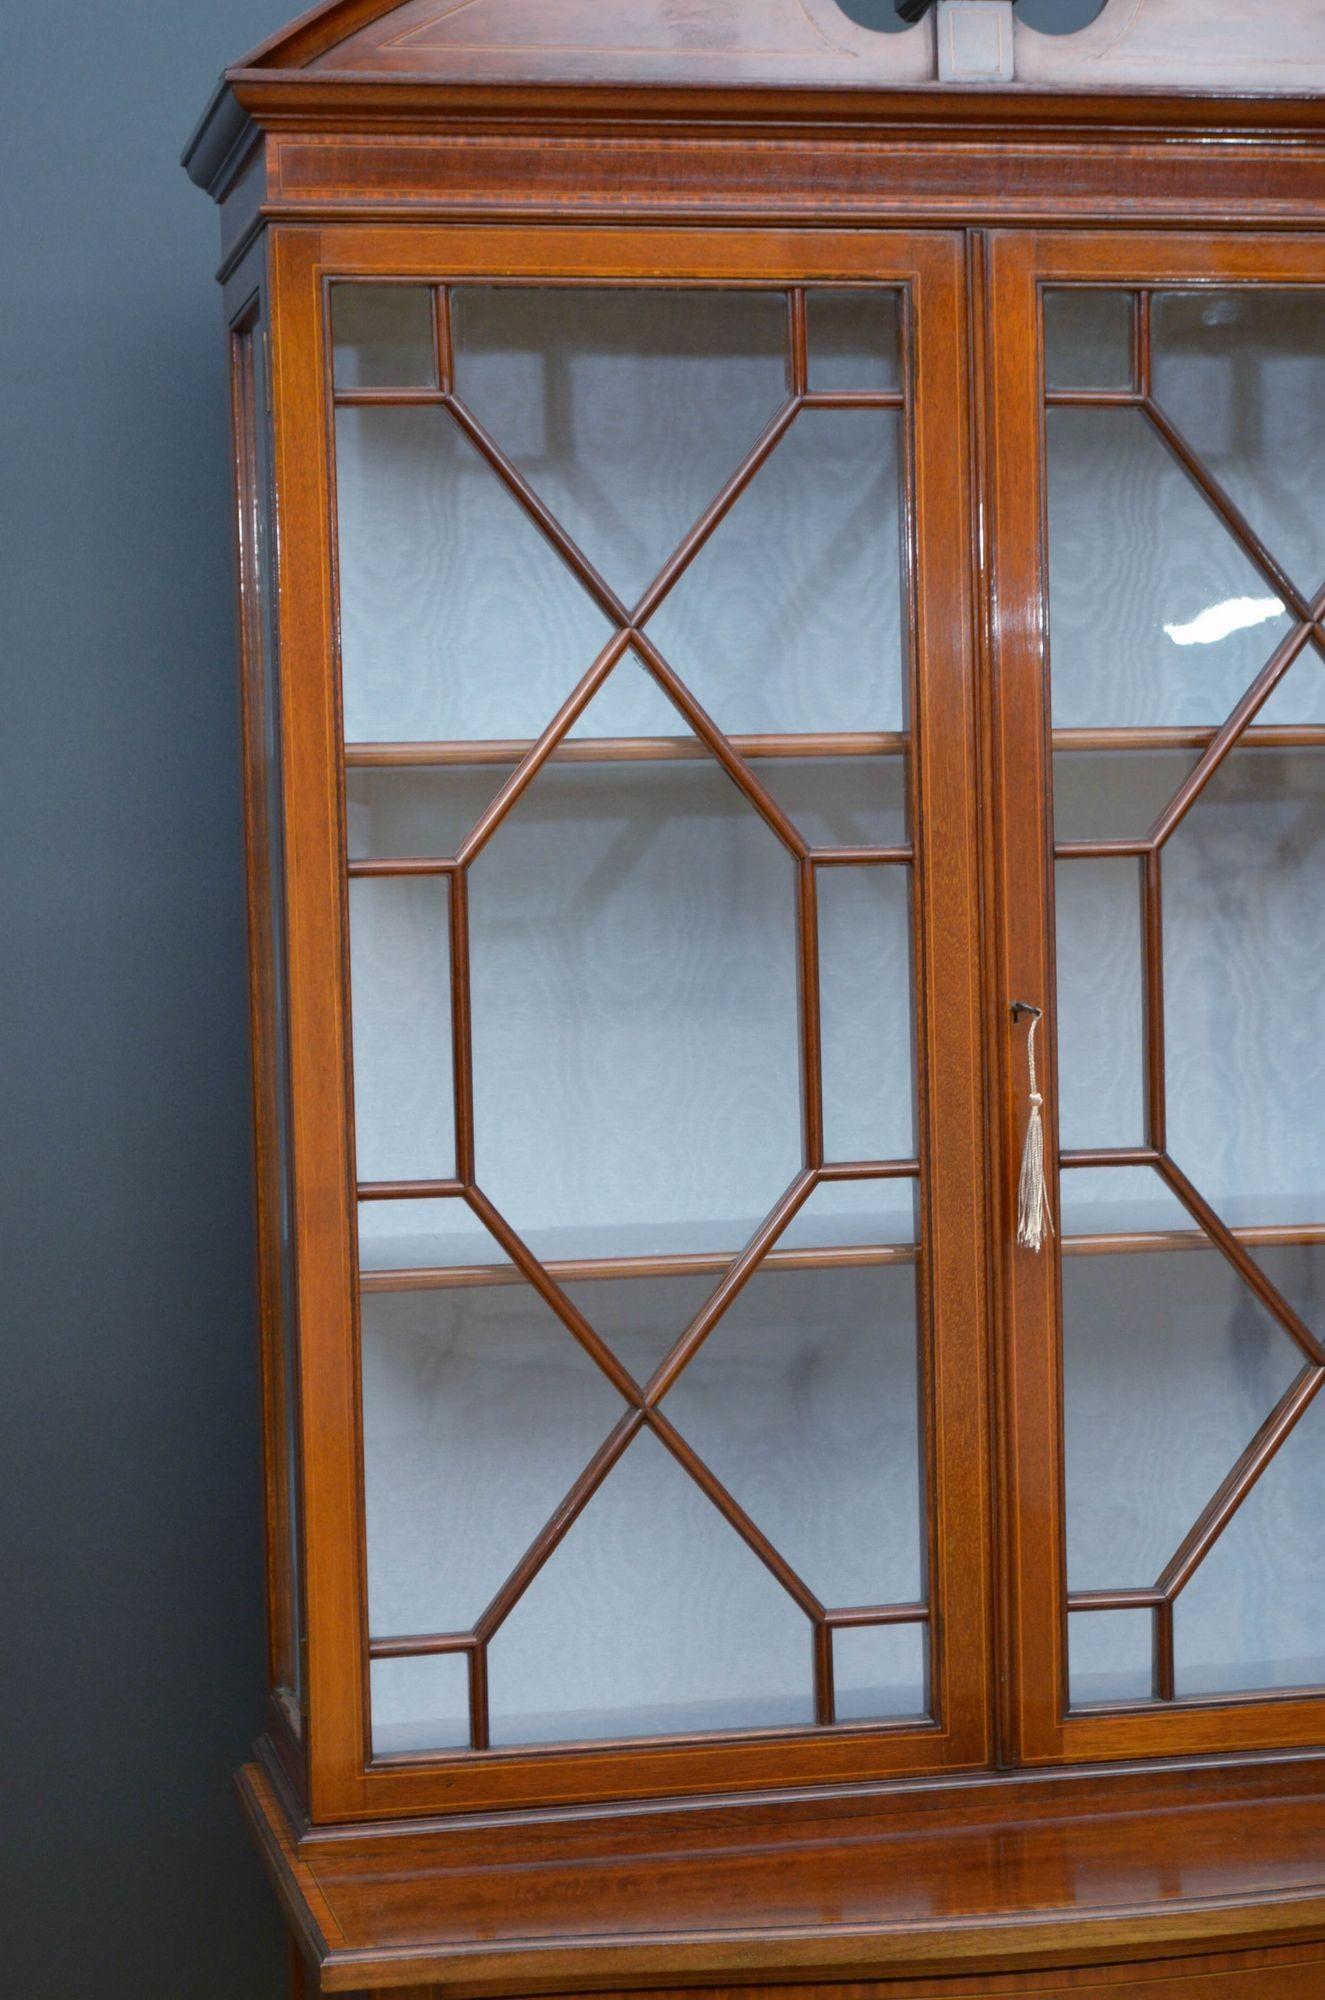 Fine Quality Edwardian Display Cabinet in Mahogany In Good Condition For Sale In Whaley Bridge, GB